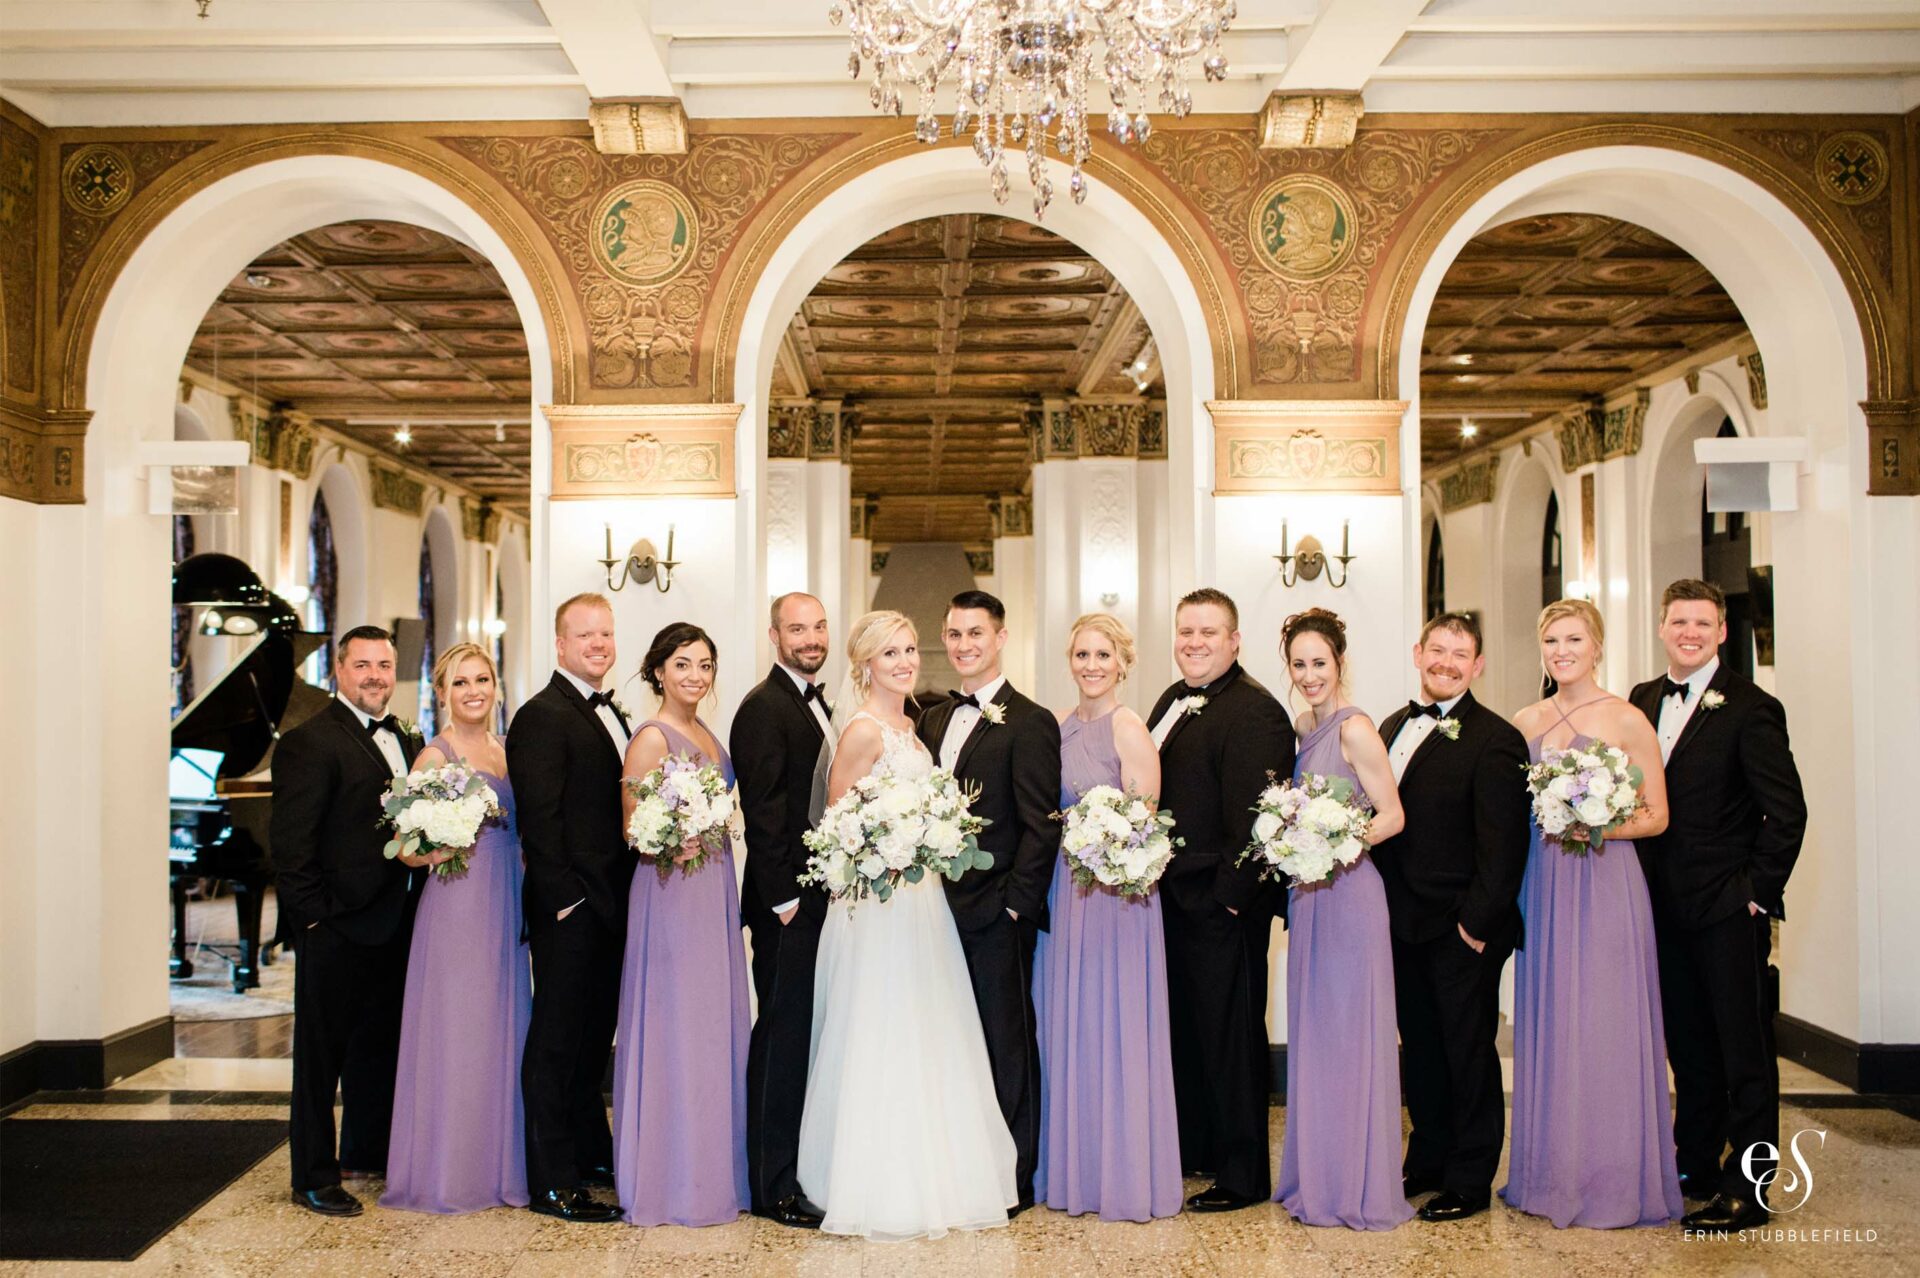 12 person wedding party in elegant room, with suited men and purpled-dressed women rotating and wedding couple in the center